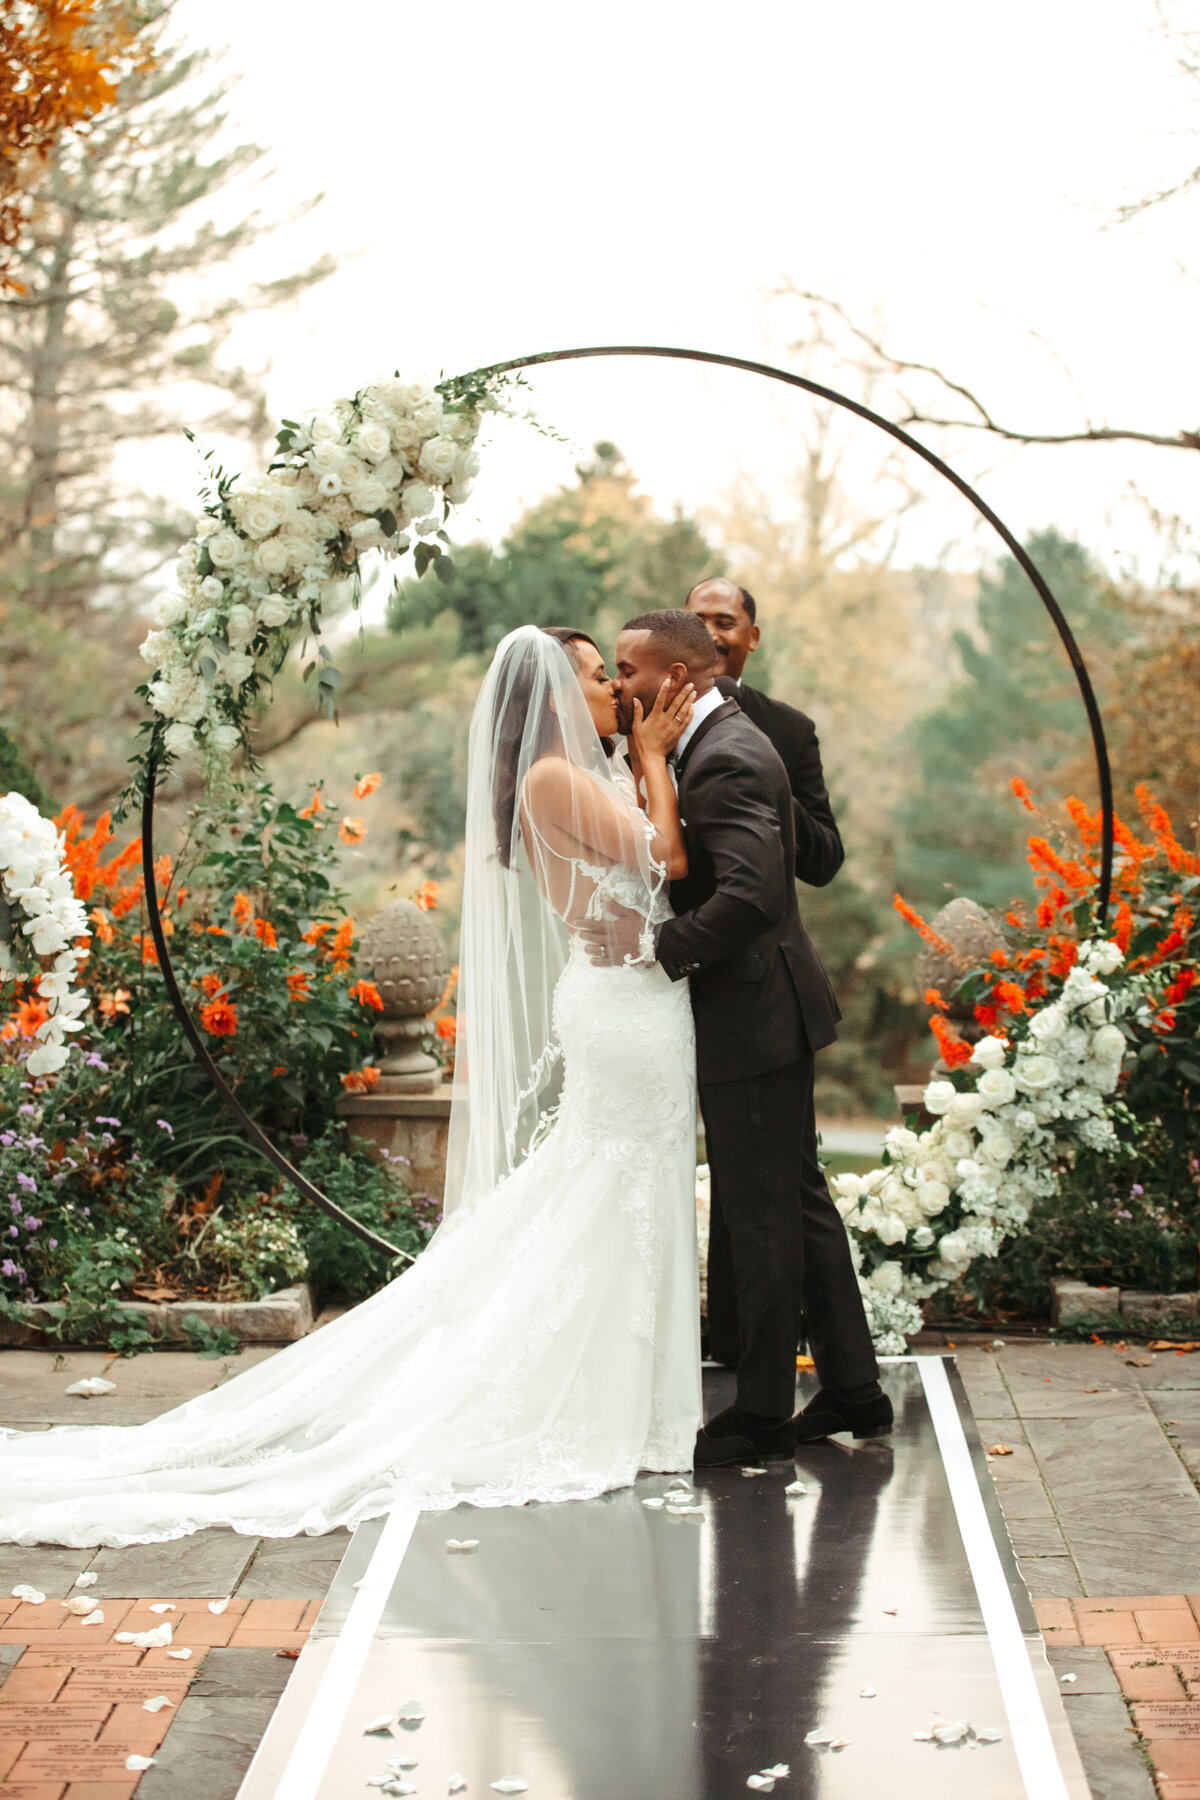 DC-Wedding-Planner-SG3-Events-Elegant Black-Tie-Wedding-in-Baltimore-Maryland - Bride-And-Groom-First-Kiss